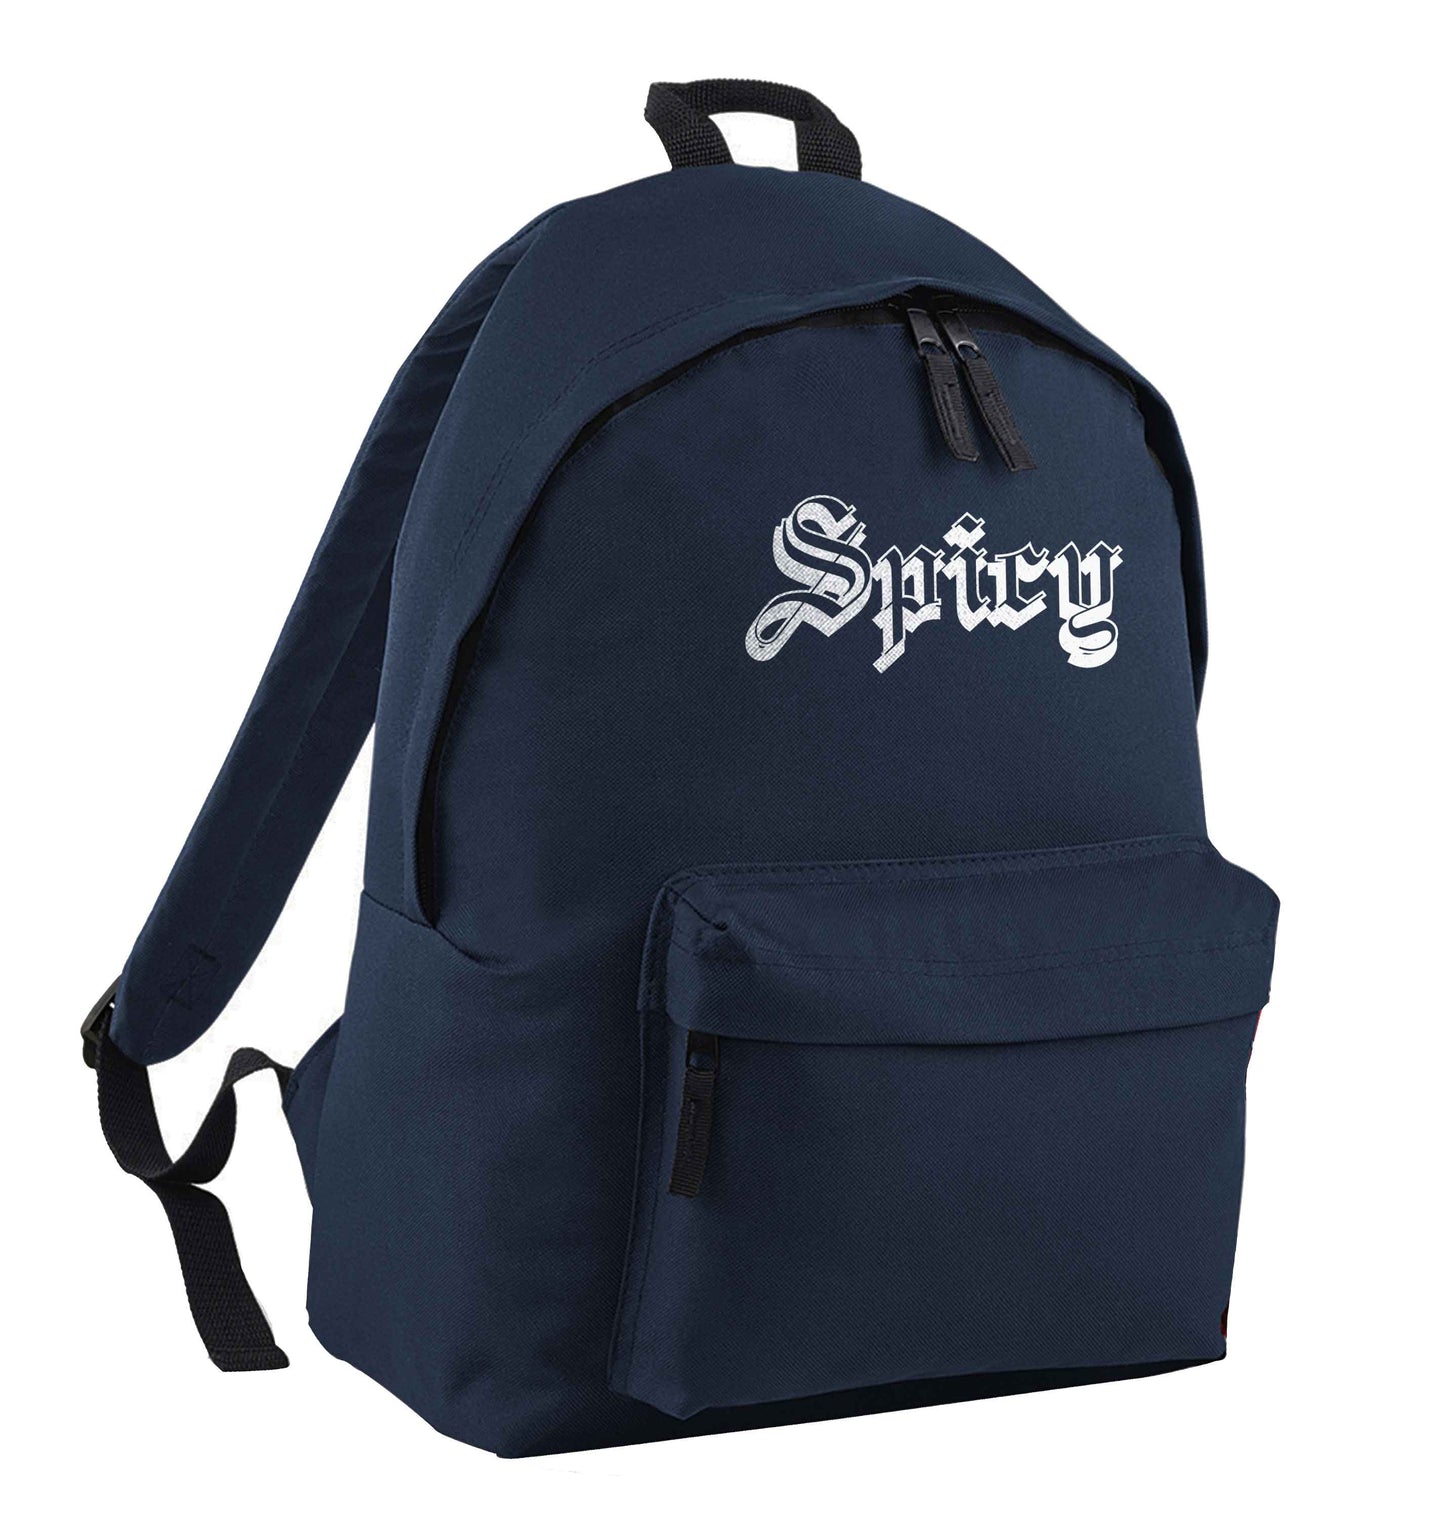 Spicy navy adults backpack